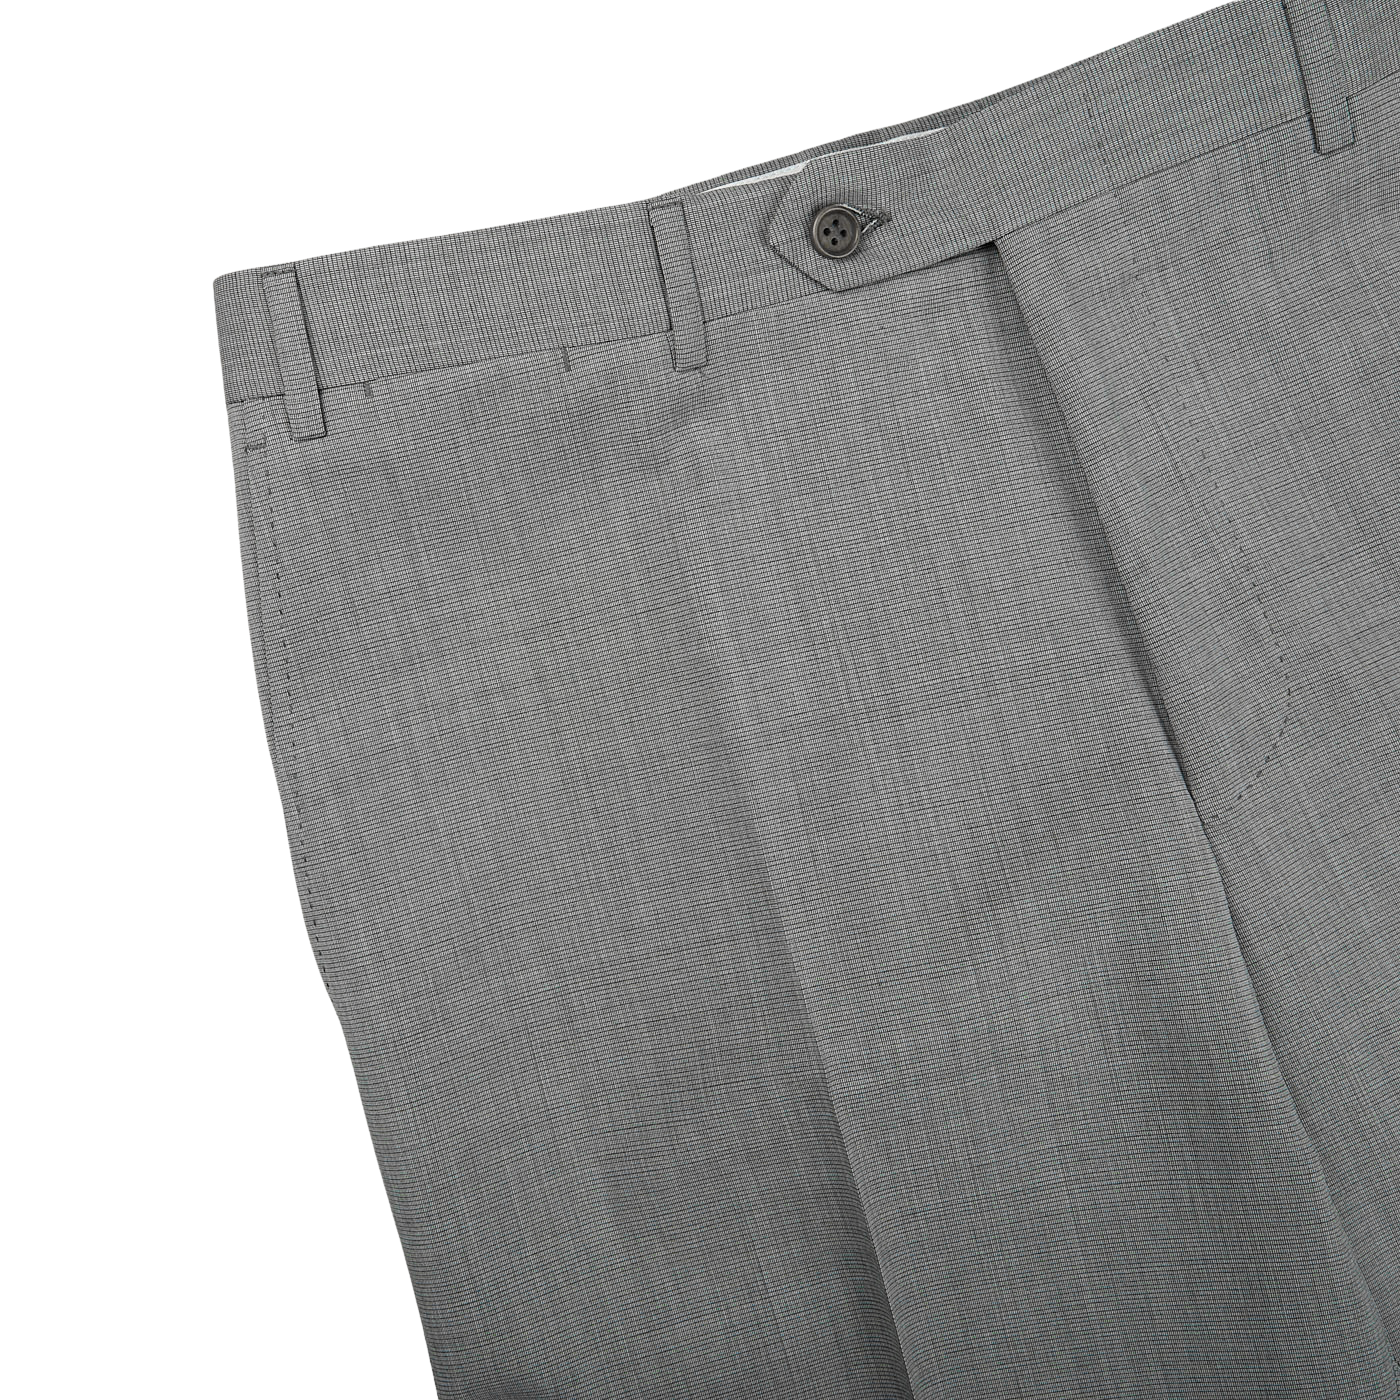 A close up image of Canali Light Grey Micro Check Wool Trousers.